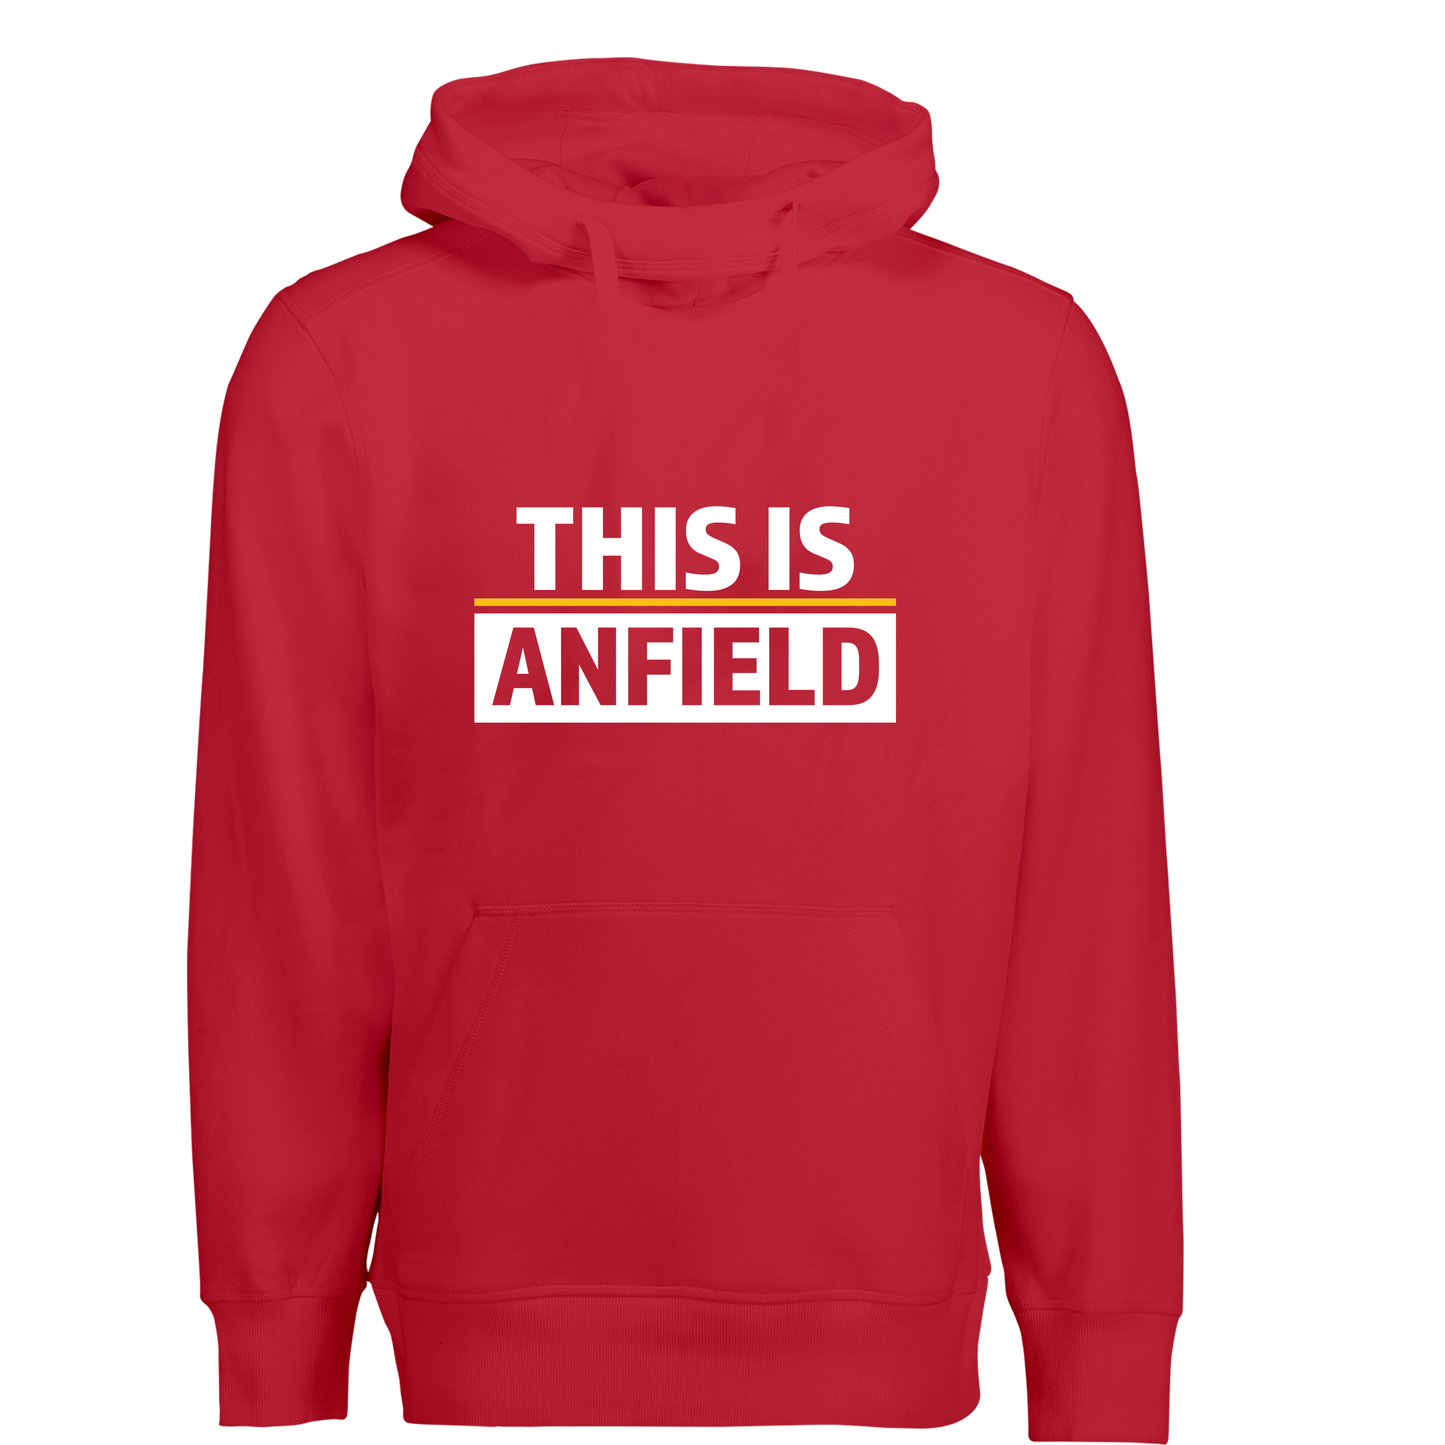 This is anfield - hoodie